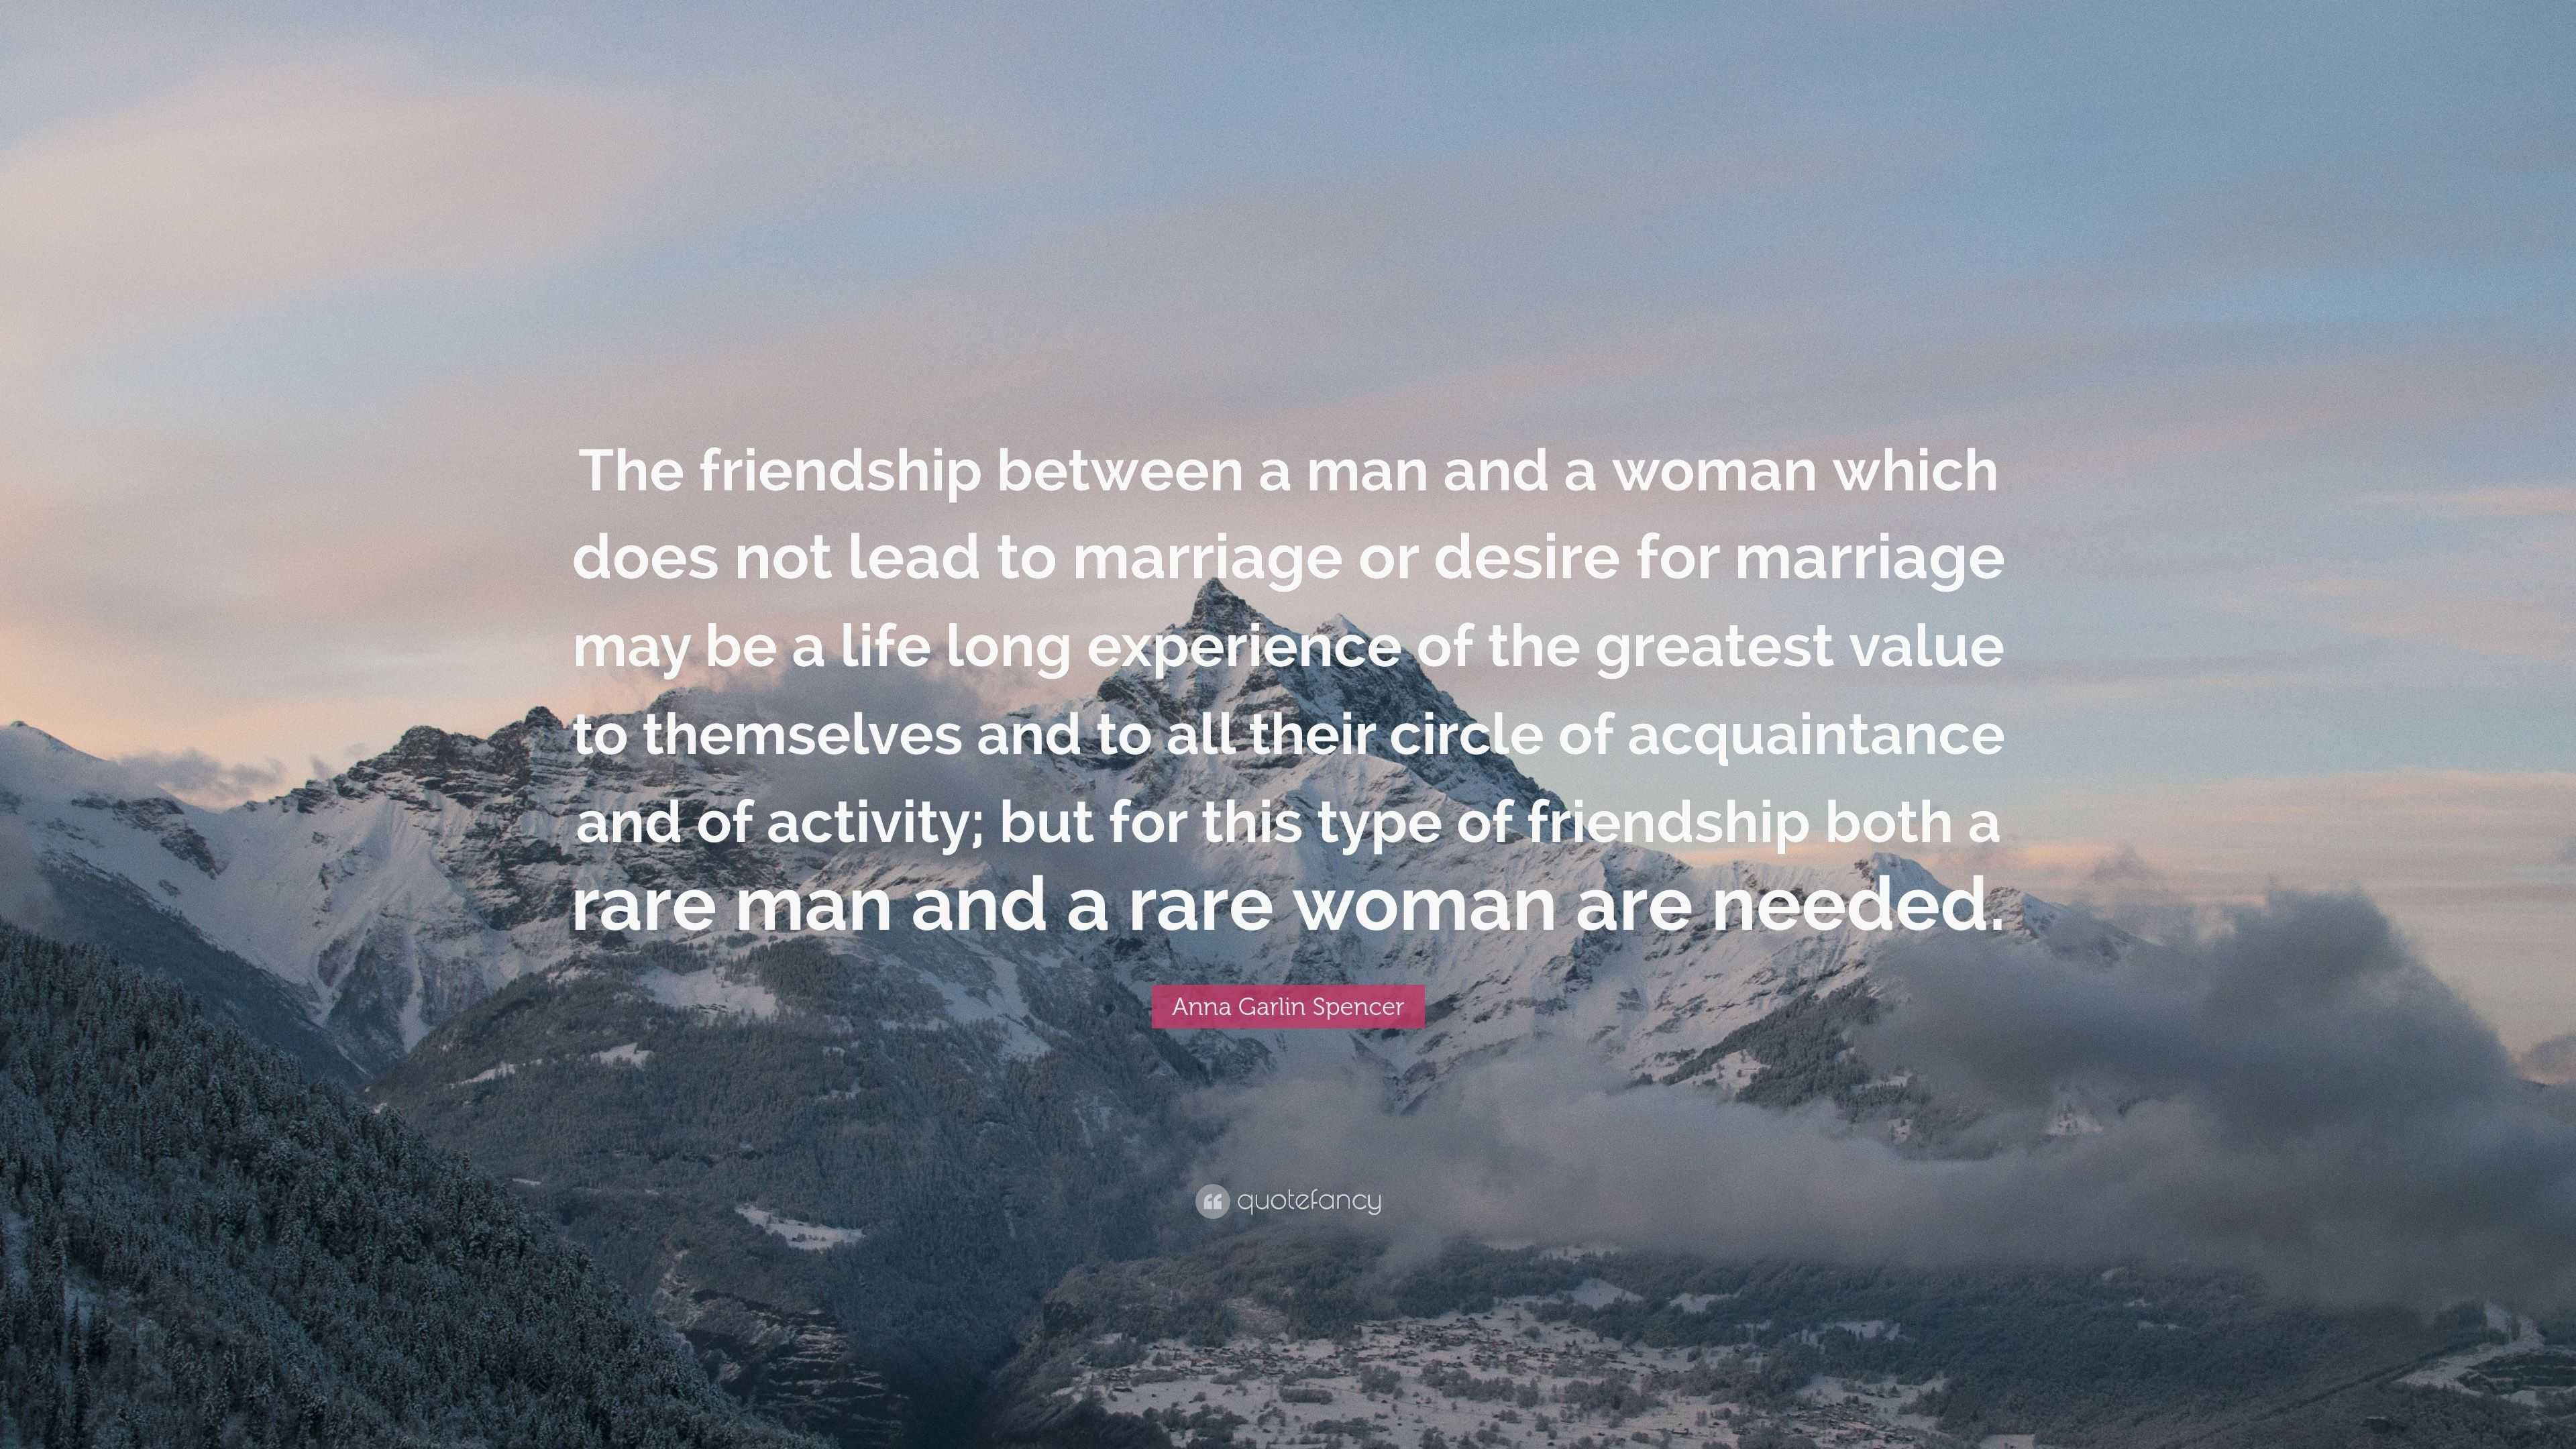 Anna Garlin Spencer Quote: “The friendship between a man and a woman ...